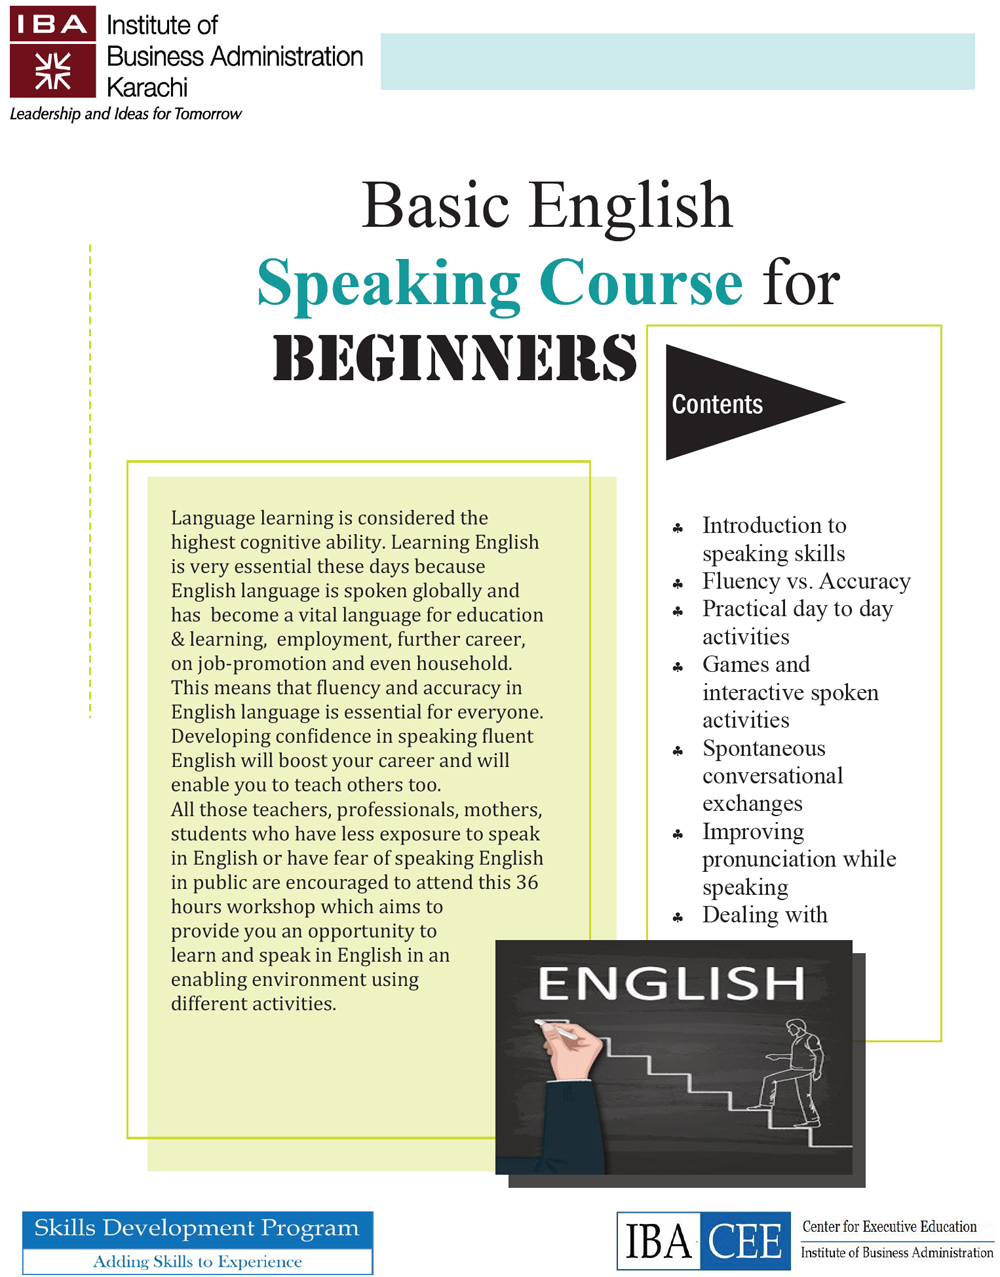 Basic English Speaking Course for beginners